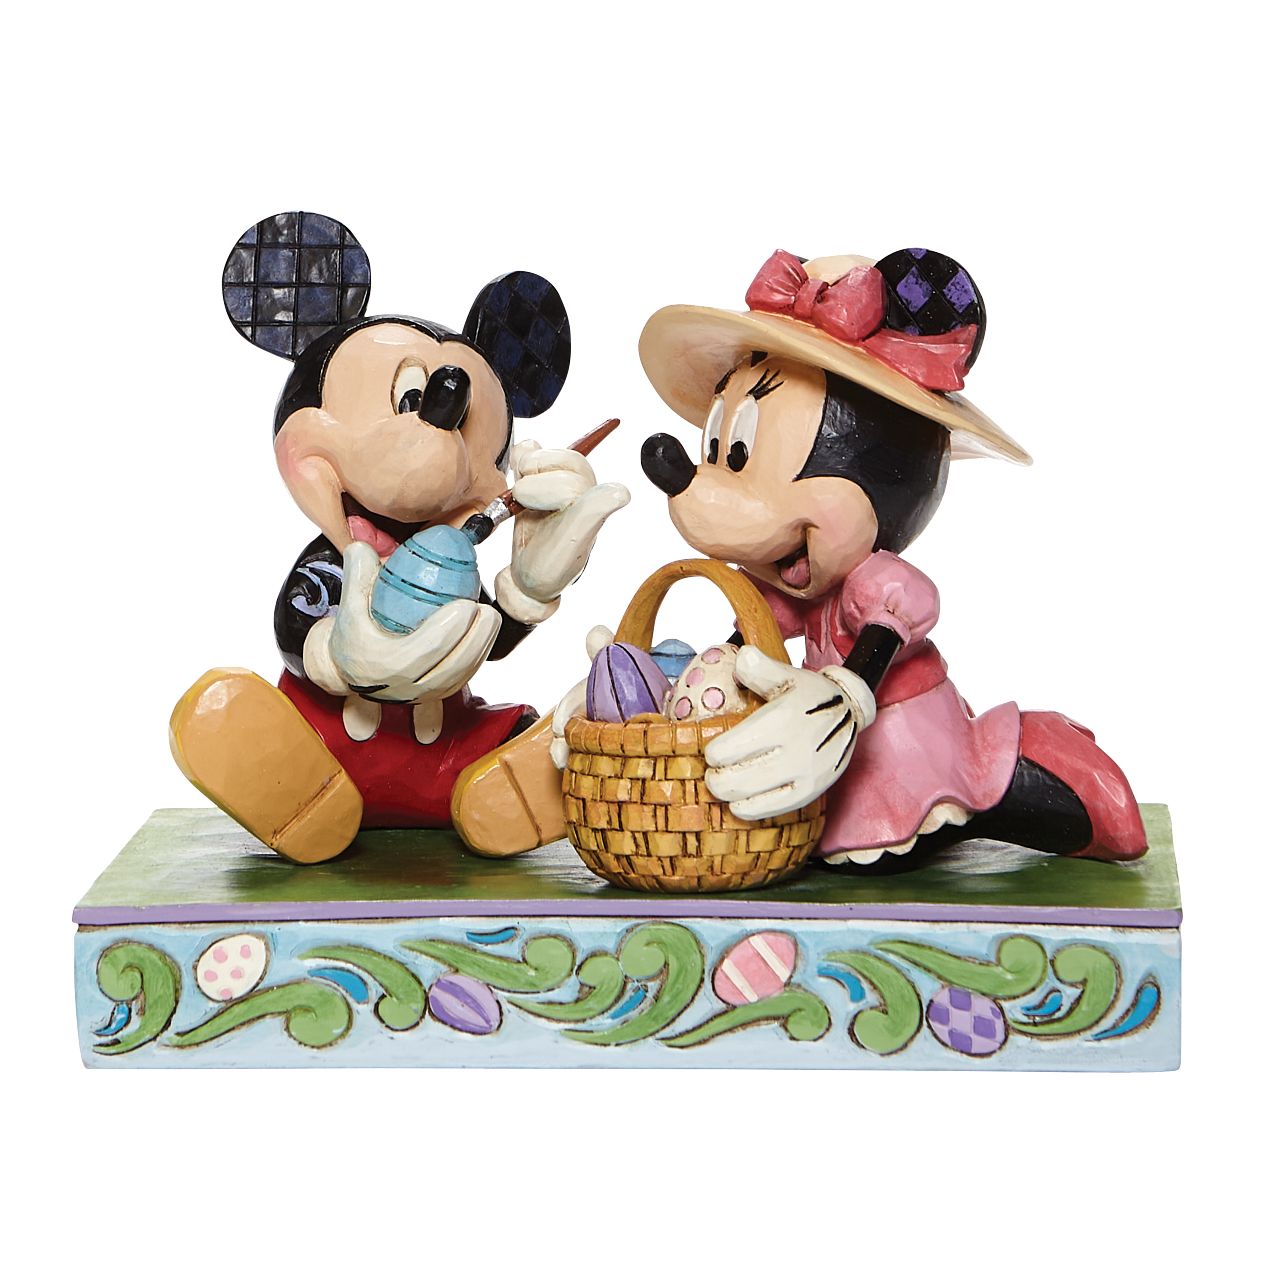 Jim Shore Easter Artistry - Mickey and Minnie Easter Figurine  In this joyful scene, Mickey and his sweetheart Minnie, are filled with excitement as they perfect their eggs for an egg hunt. Brighten up your collection with this vibrantly, colorful Easter piece by Jim Shore.